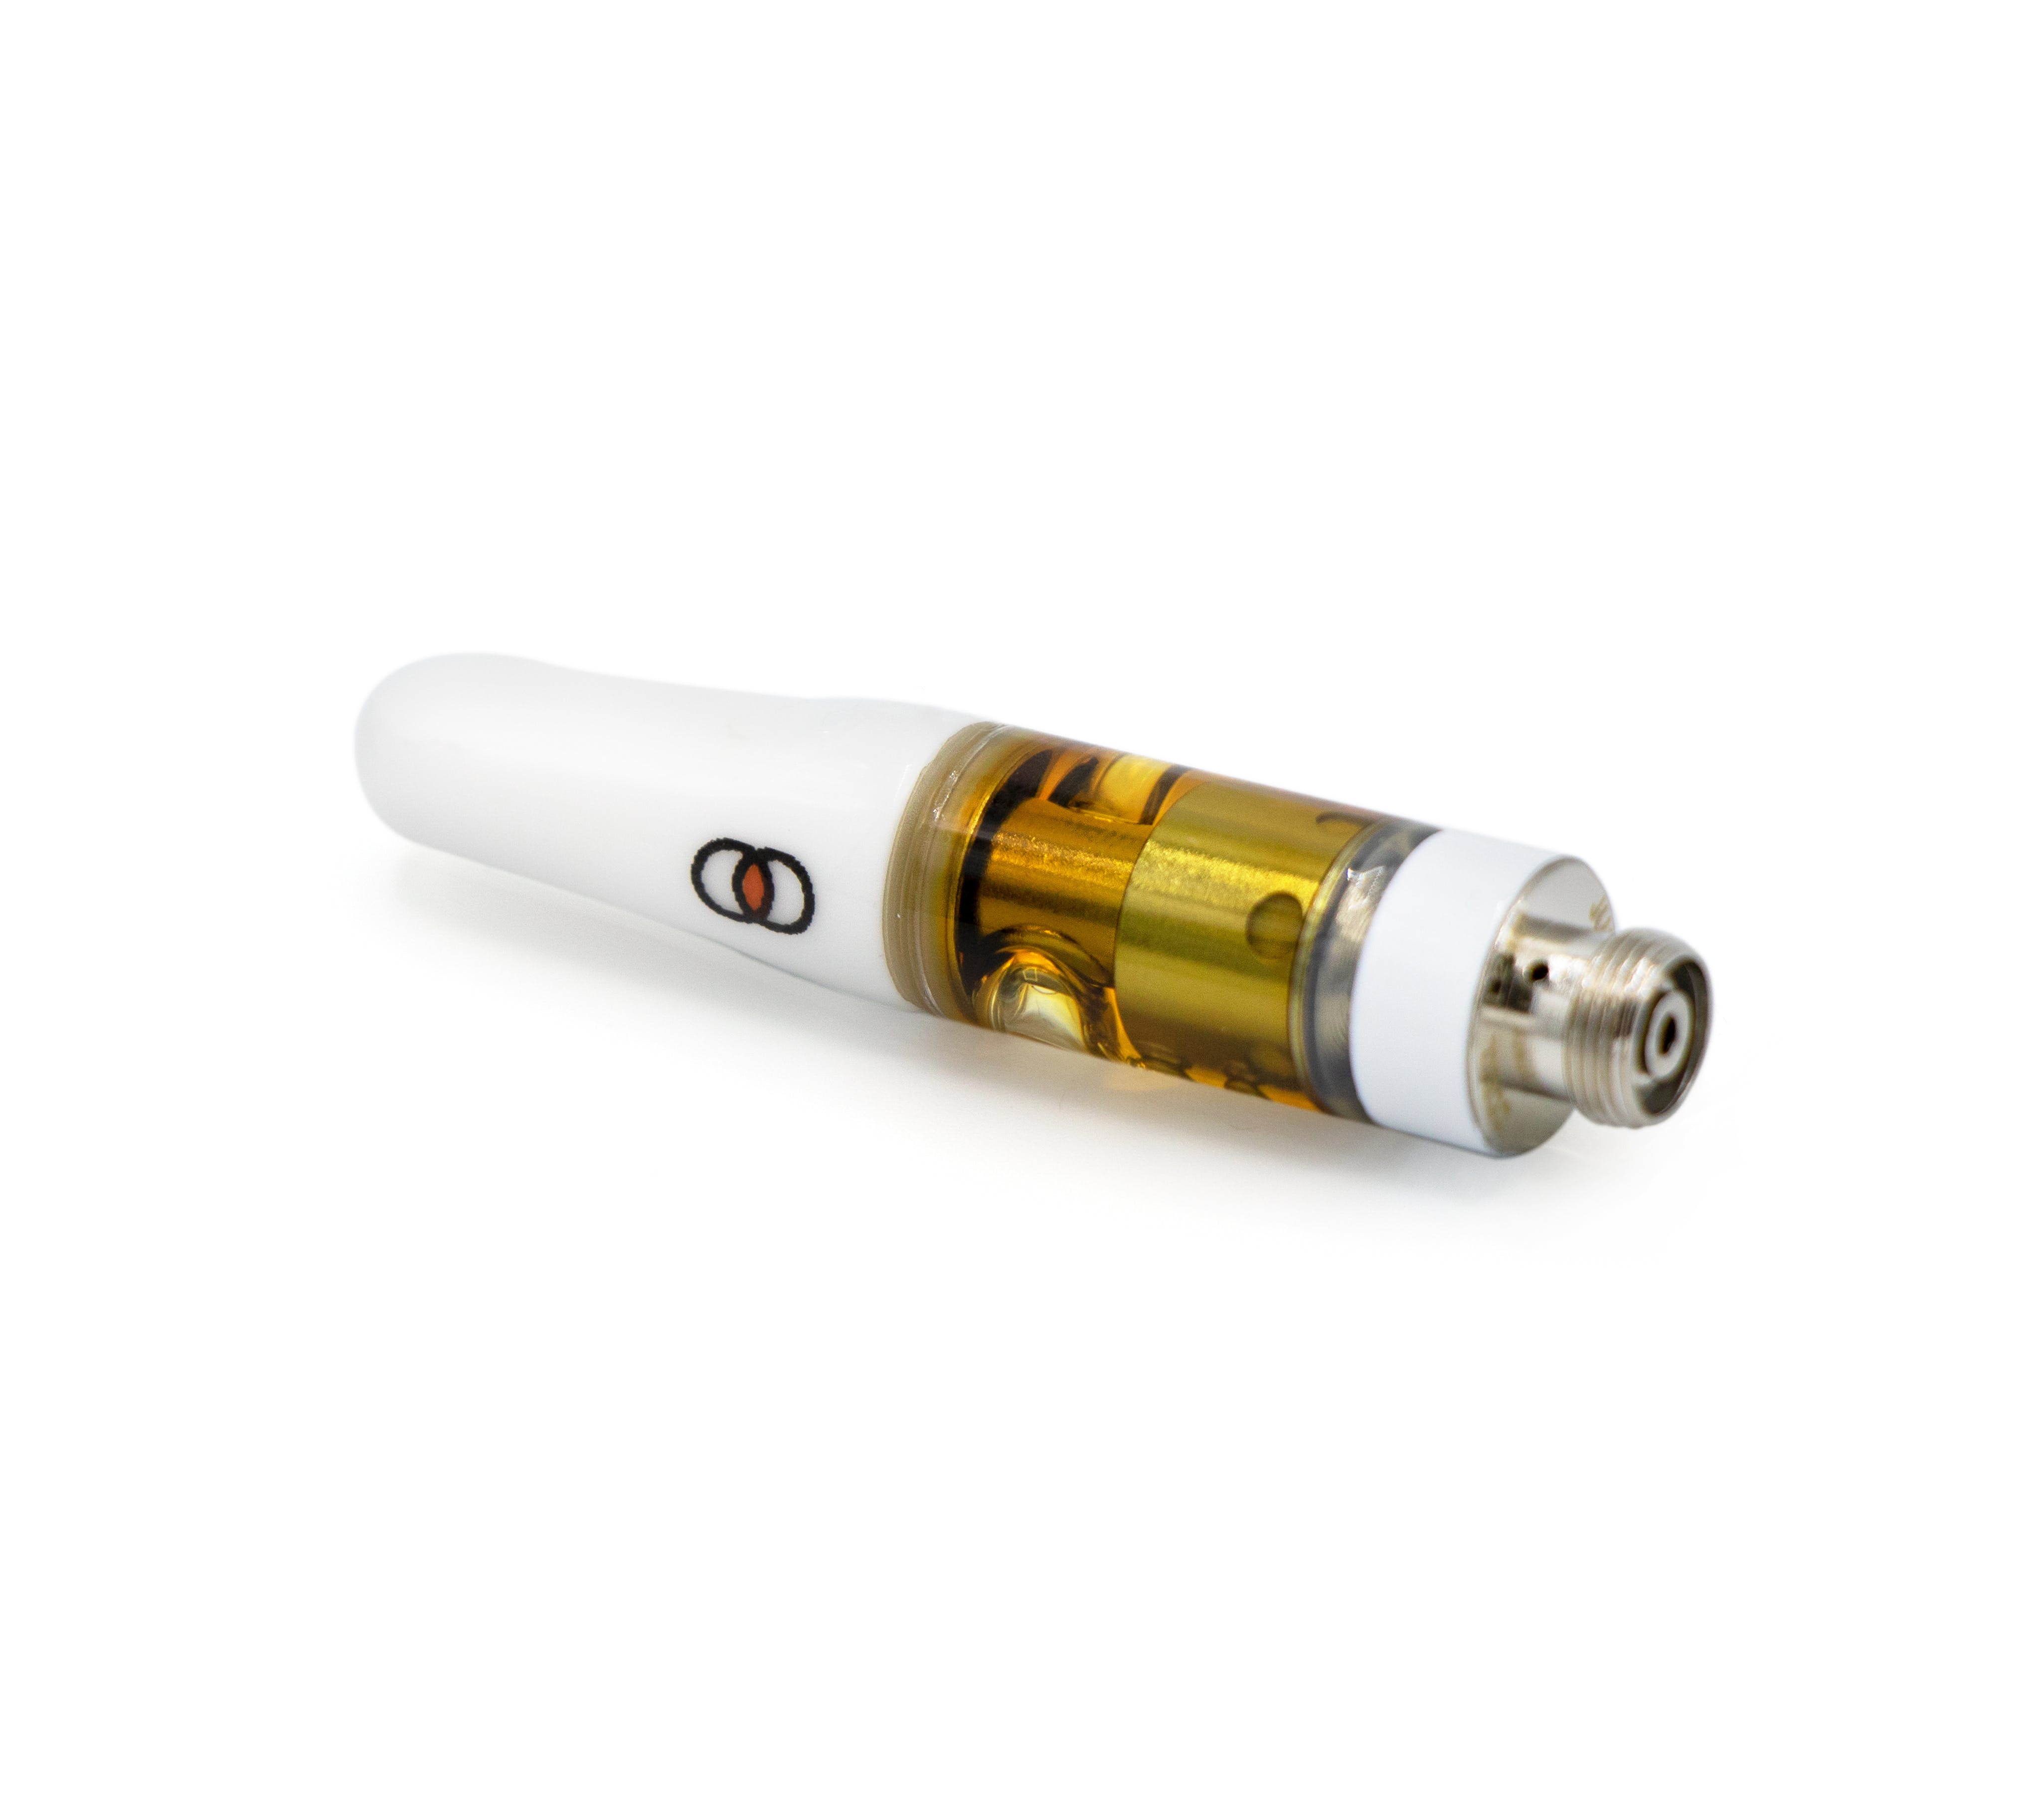 concentrate-bloom-king-louis-xiii-vape-cartridge-0-5g